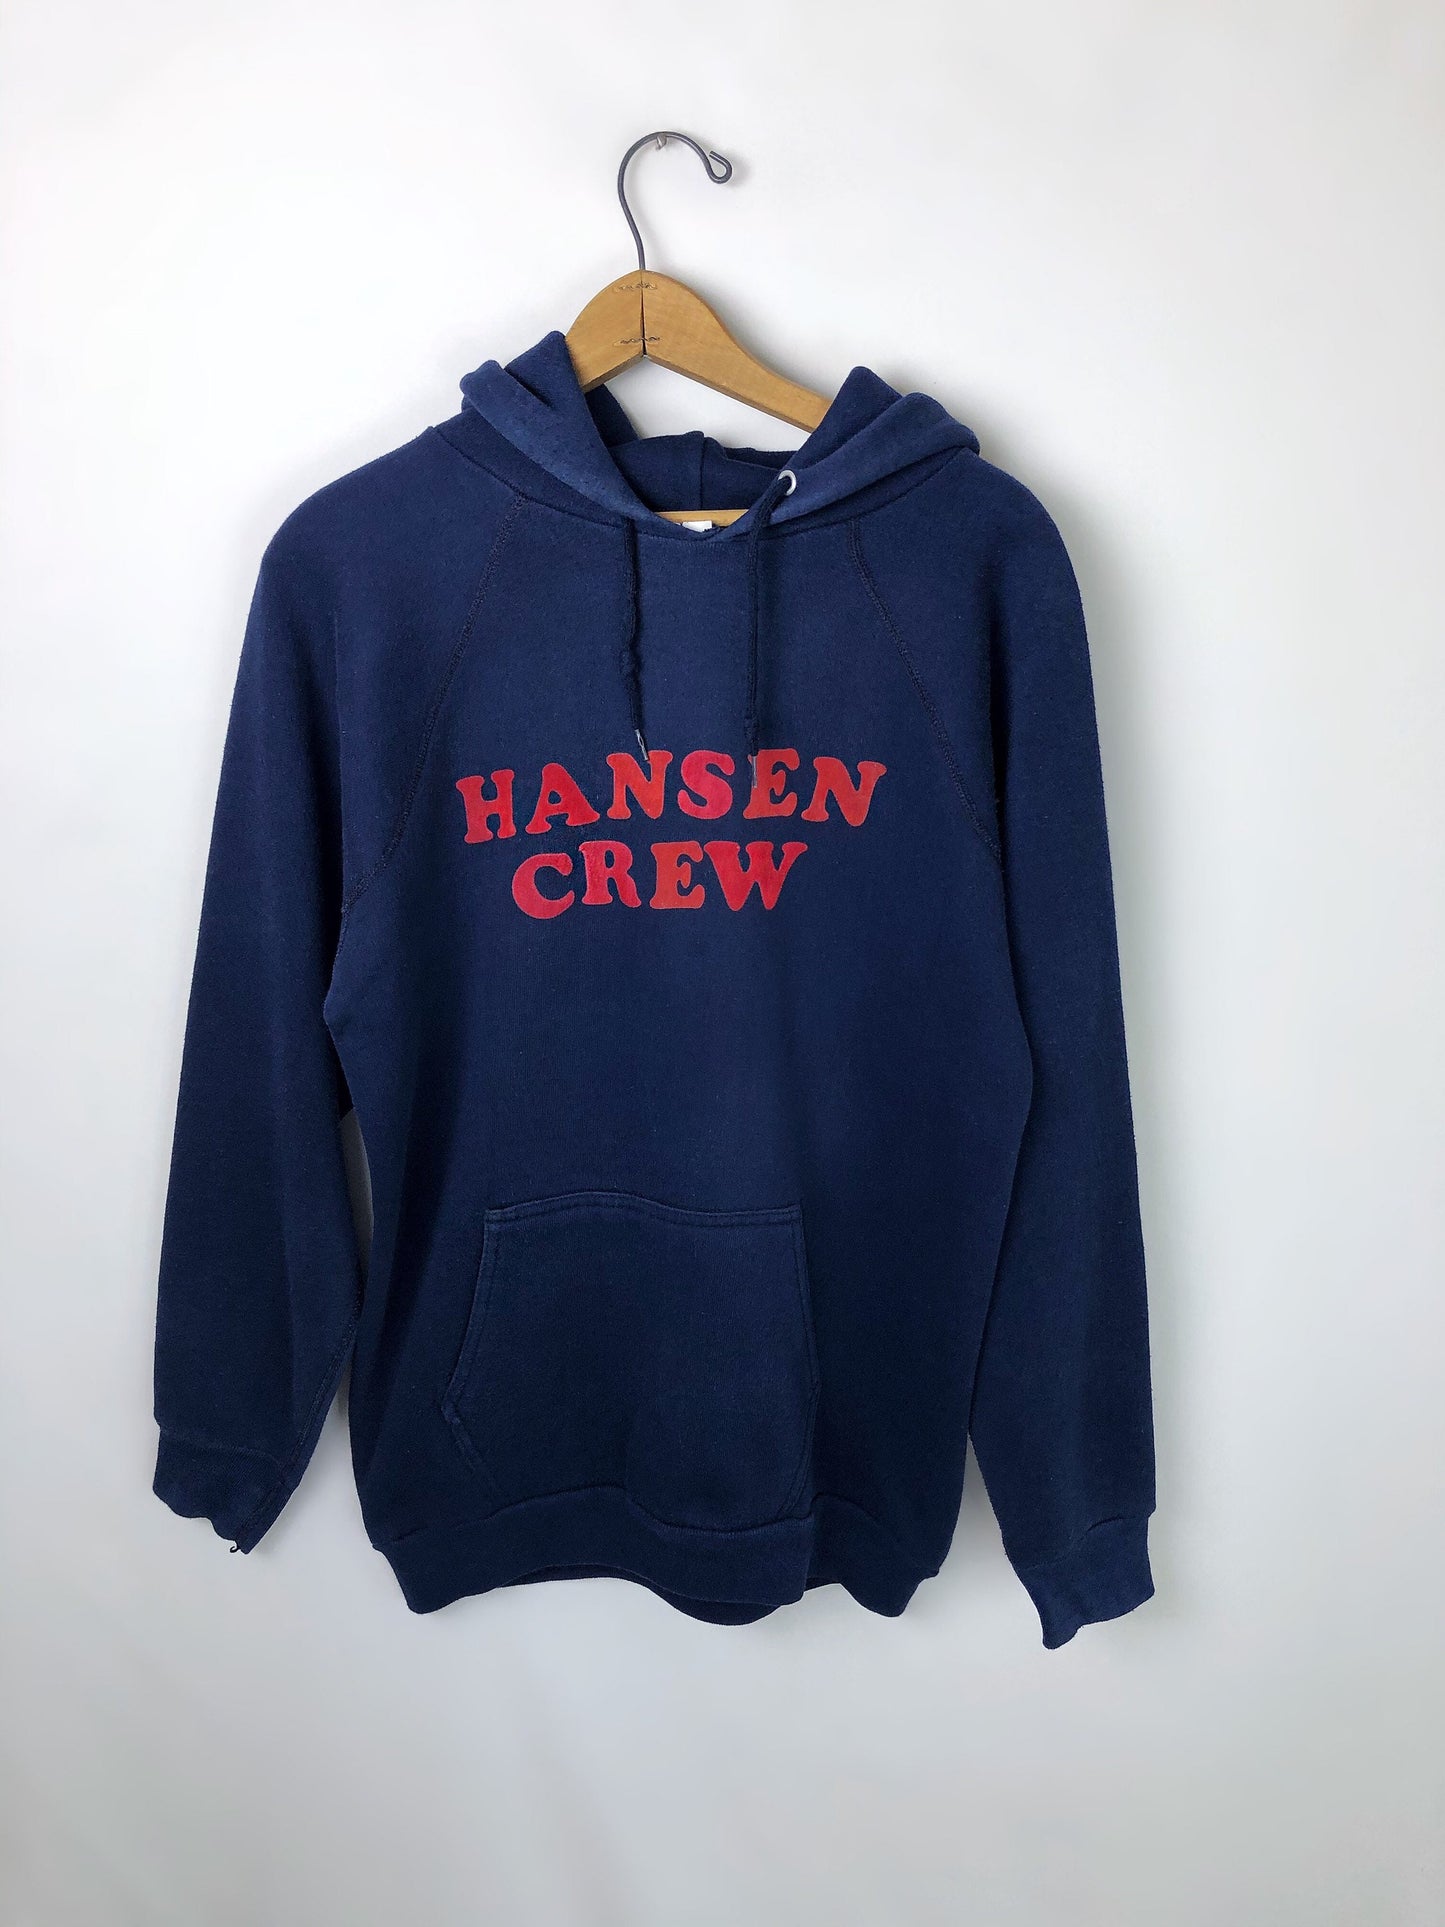 80’s HANSEN CREW Flocked Letters 50/50 Athletic Hoodie Size Large